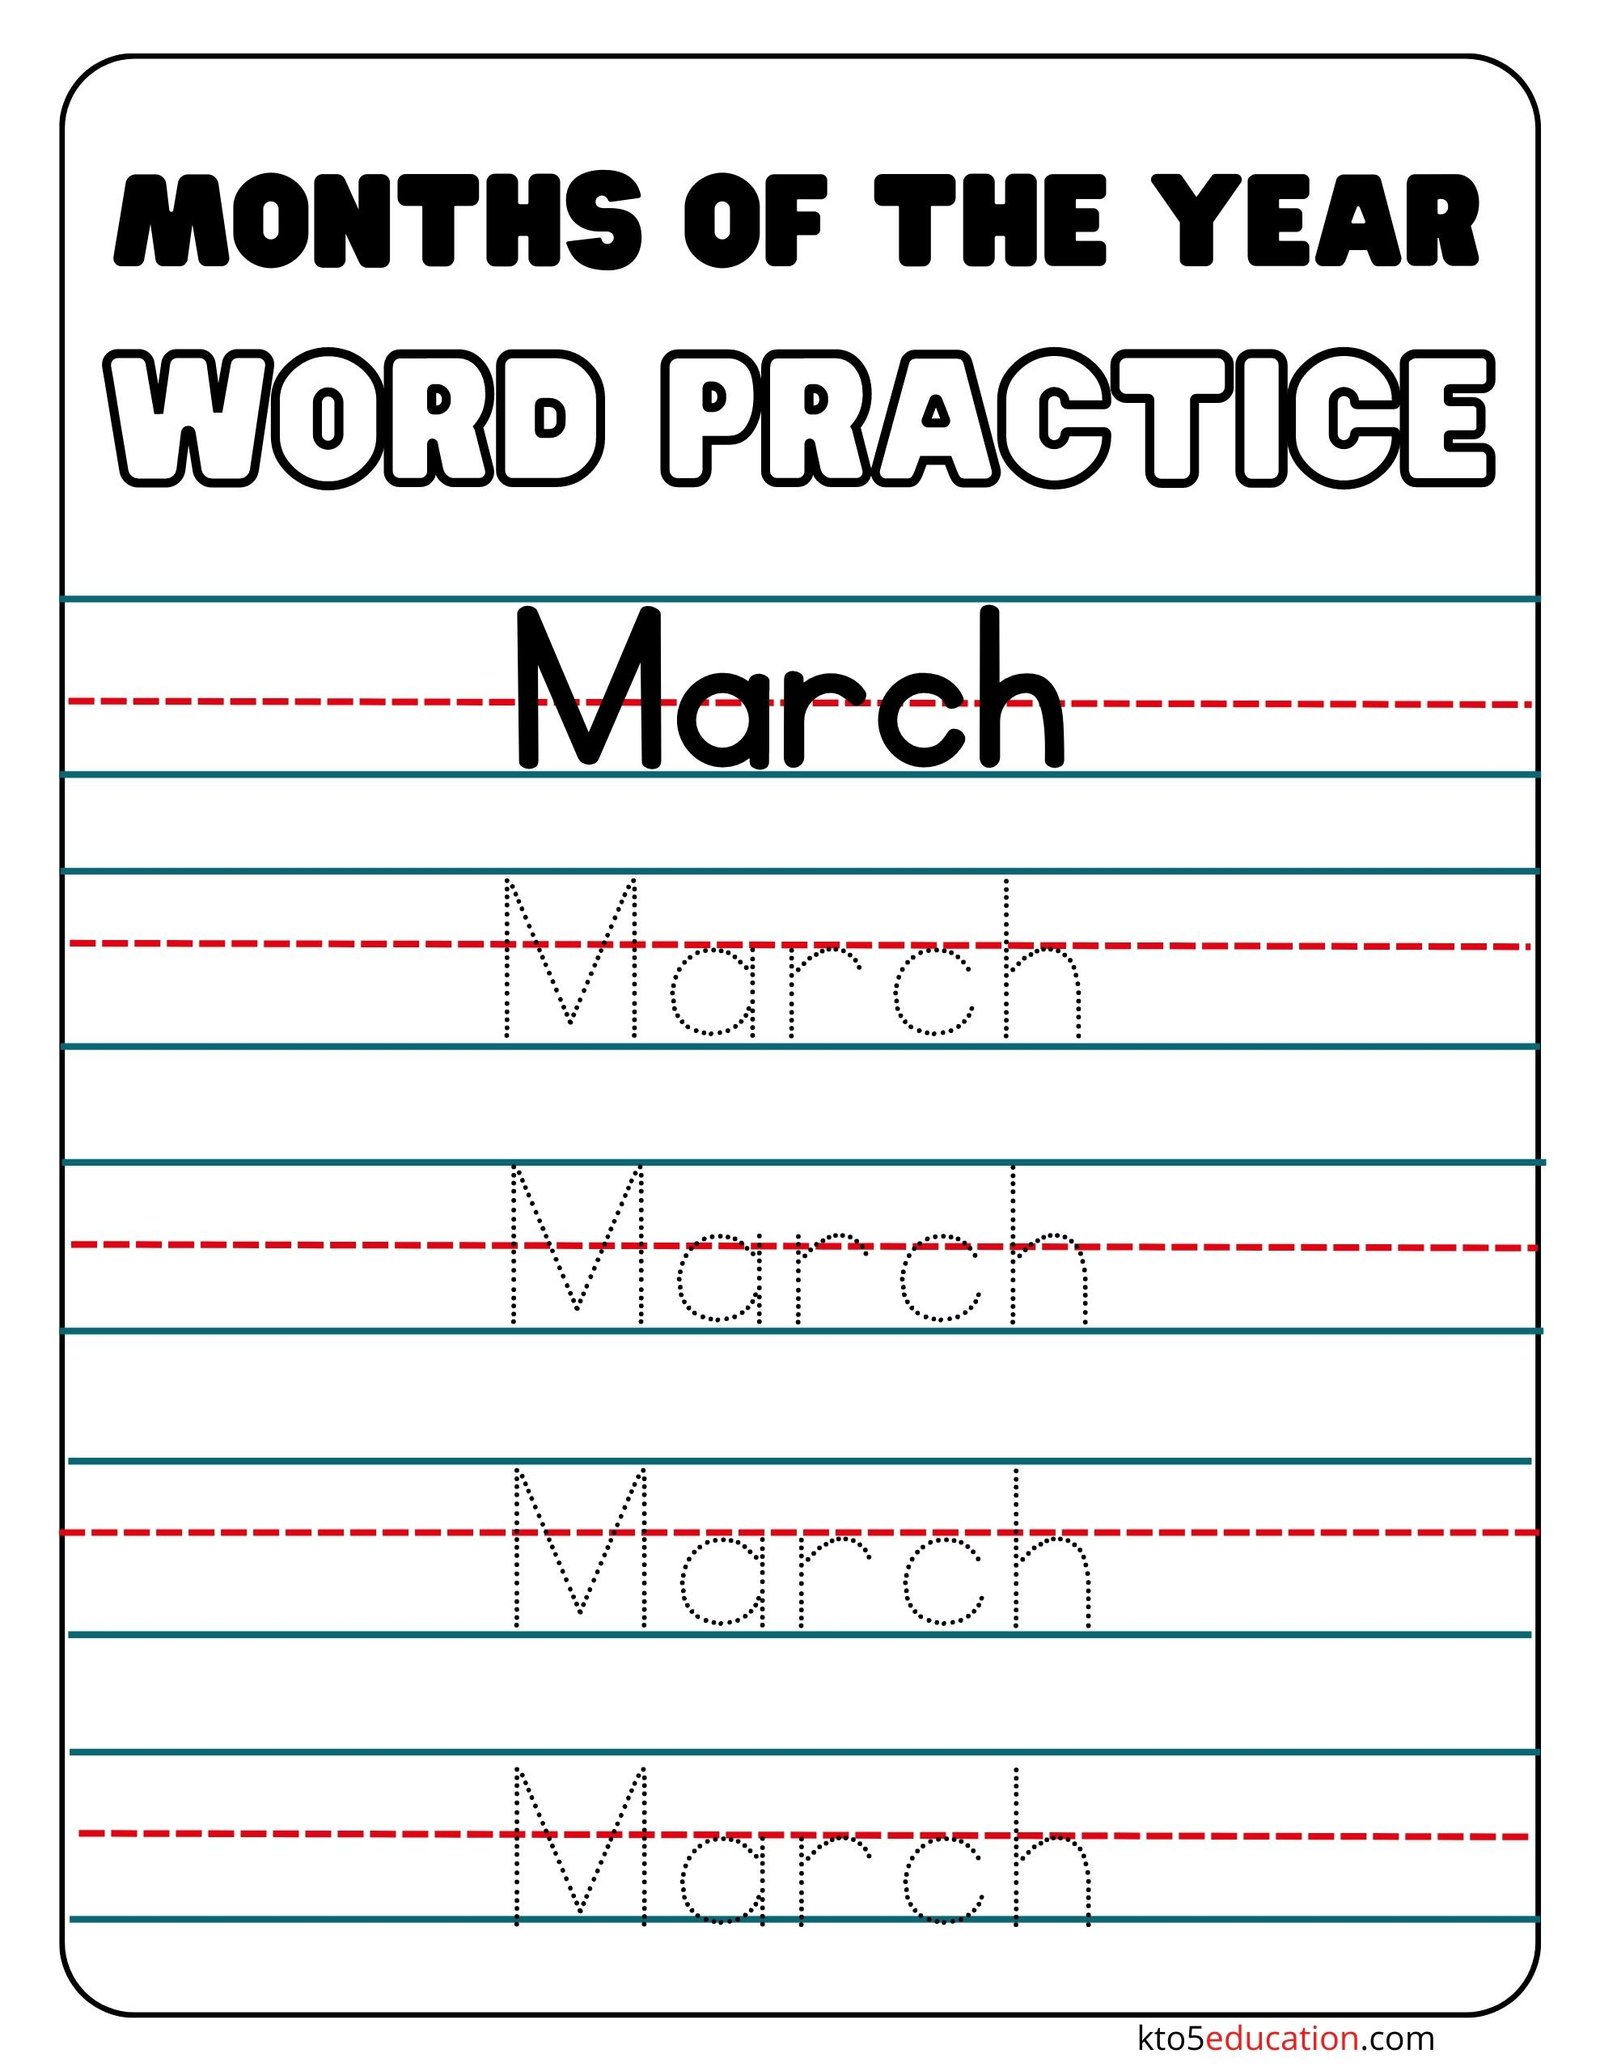 Months Of the year March Word Practice Worksheet